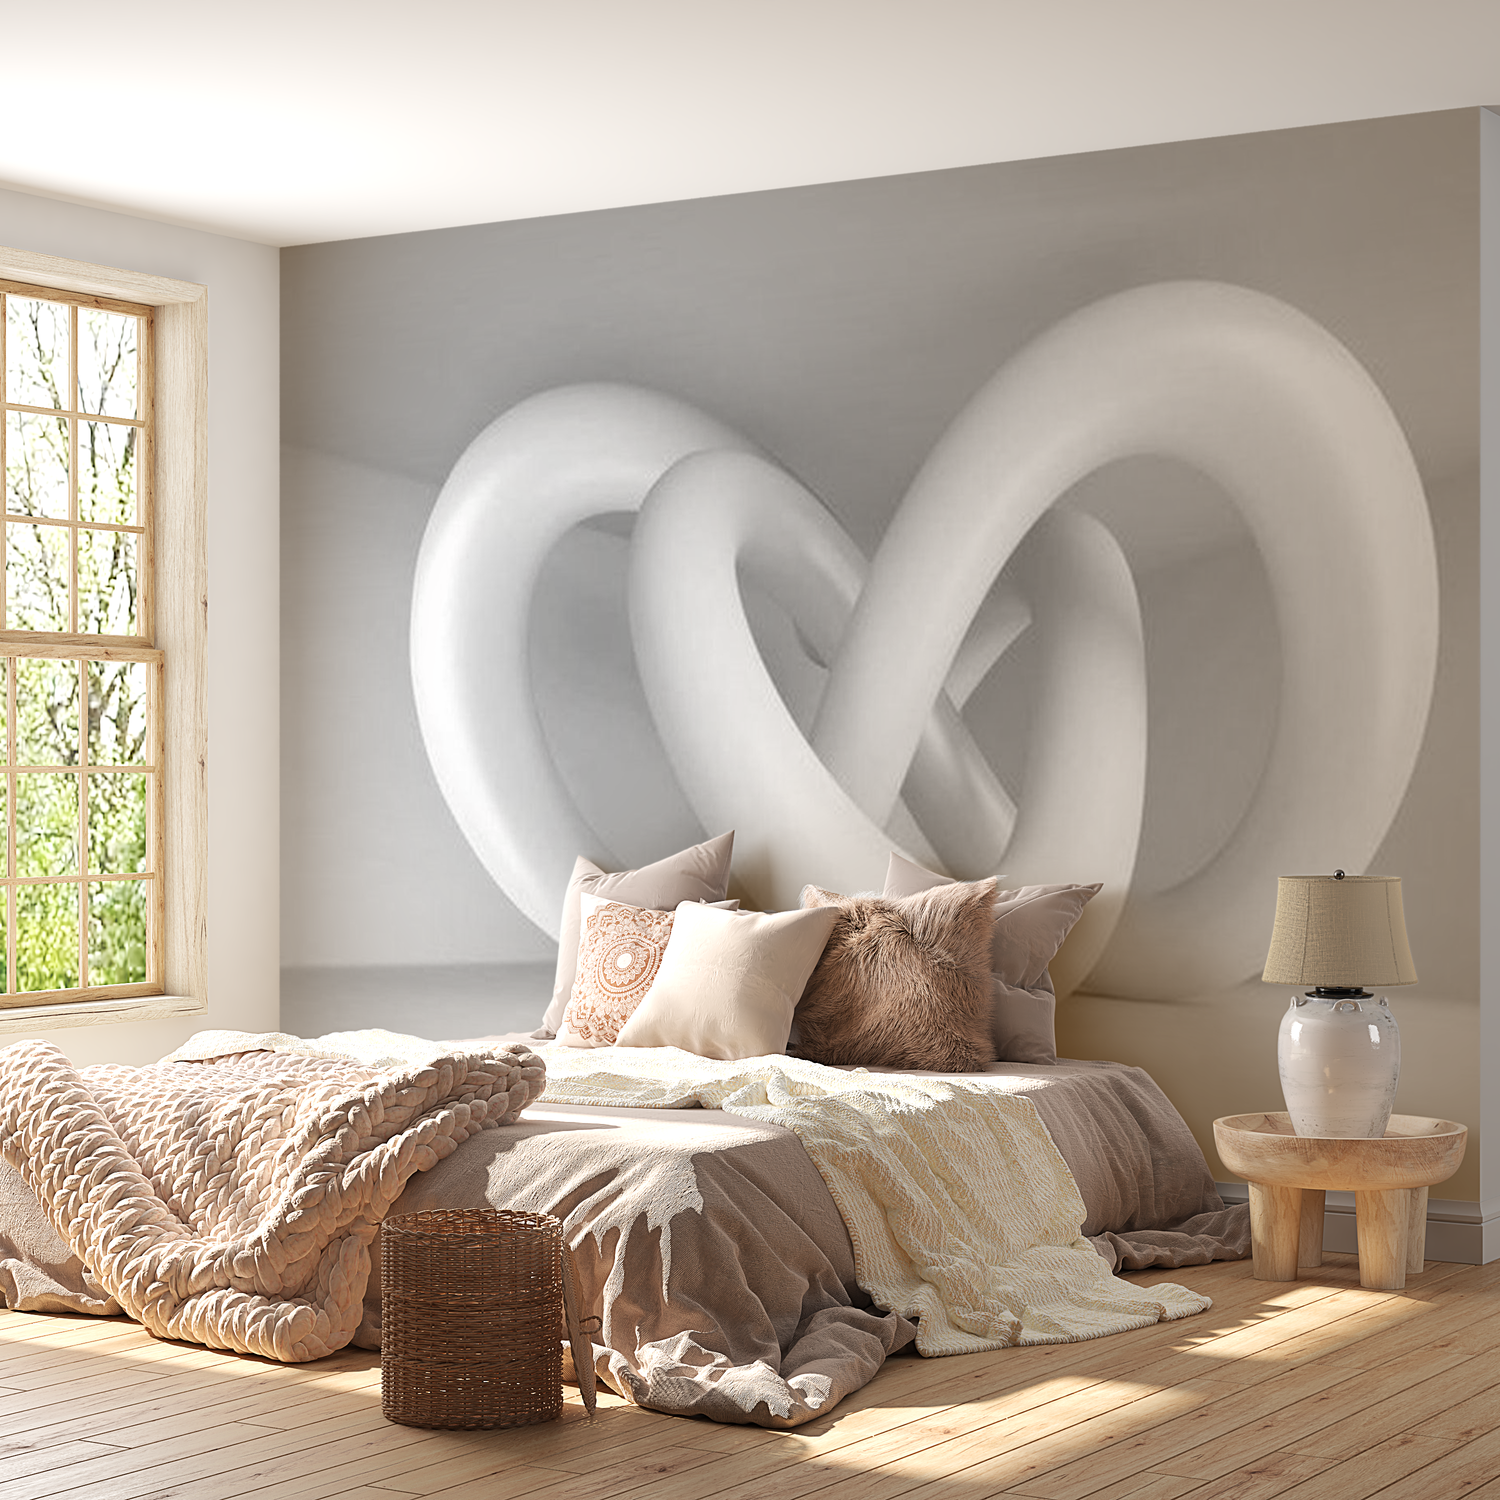 3D Illusion Wallpaper Wall Mural - White Weave 39"Wx27"H